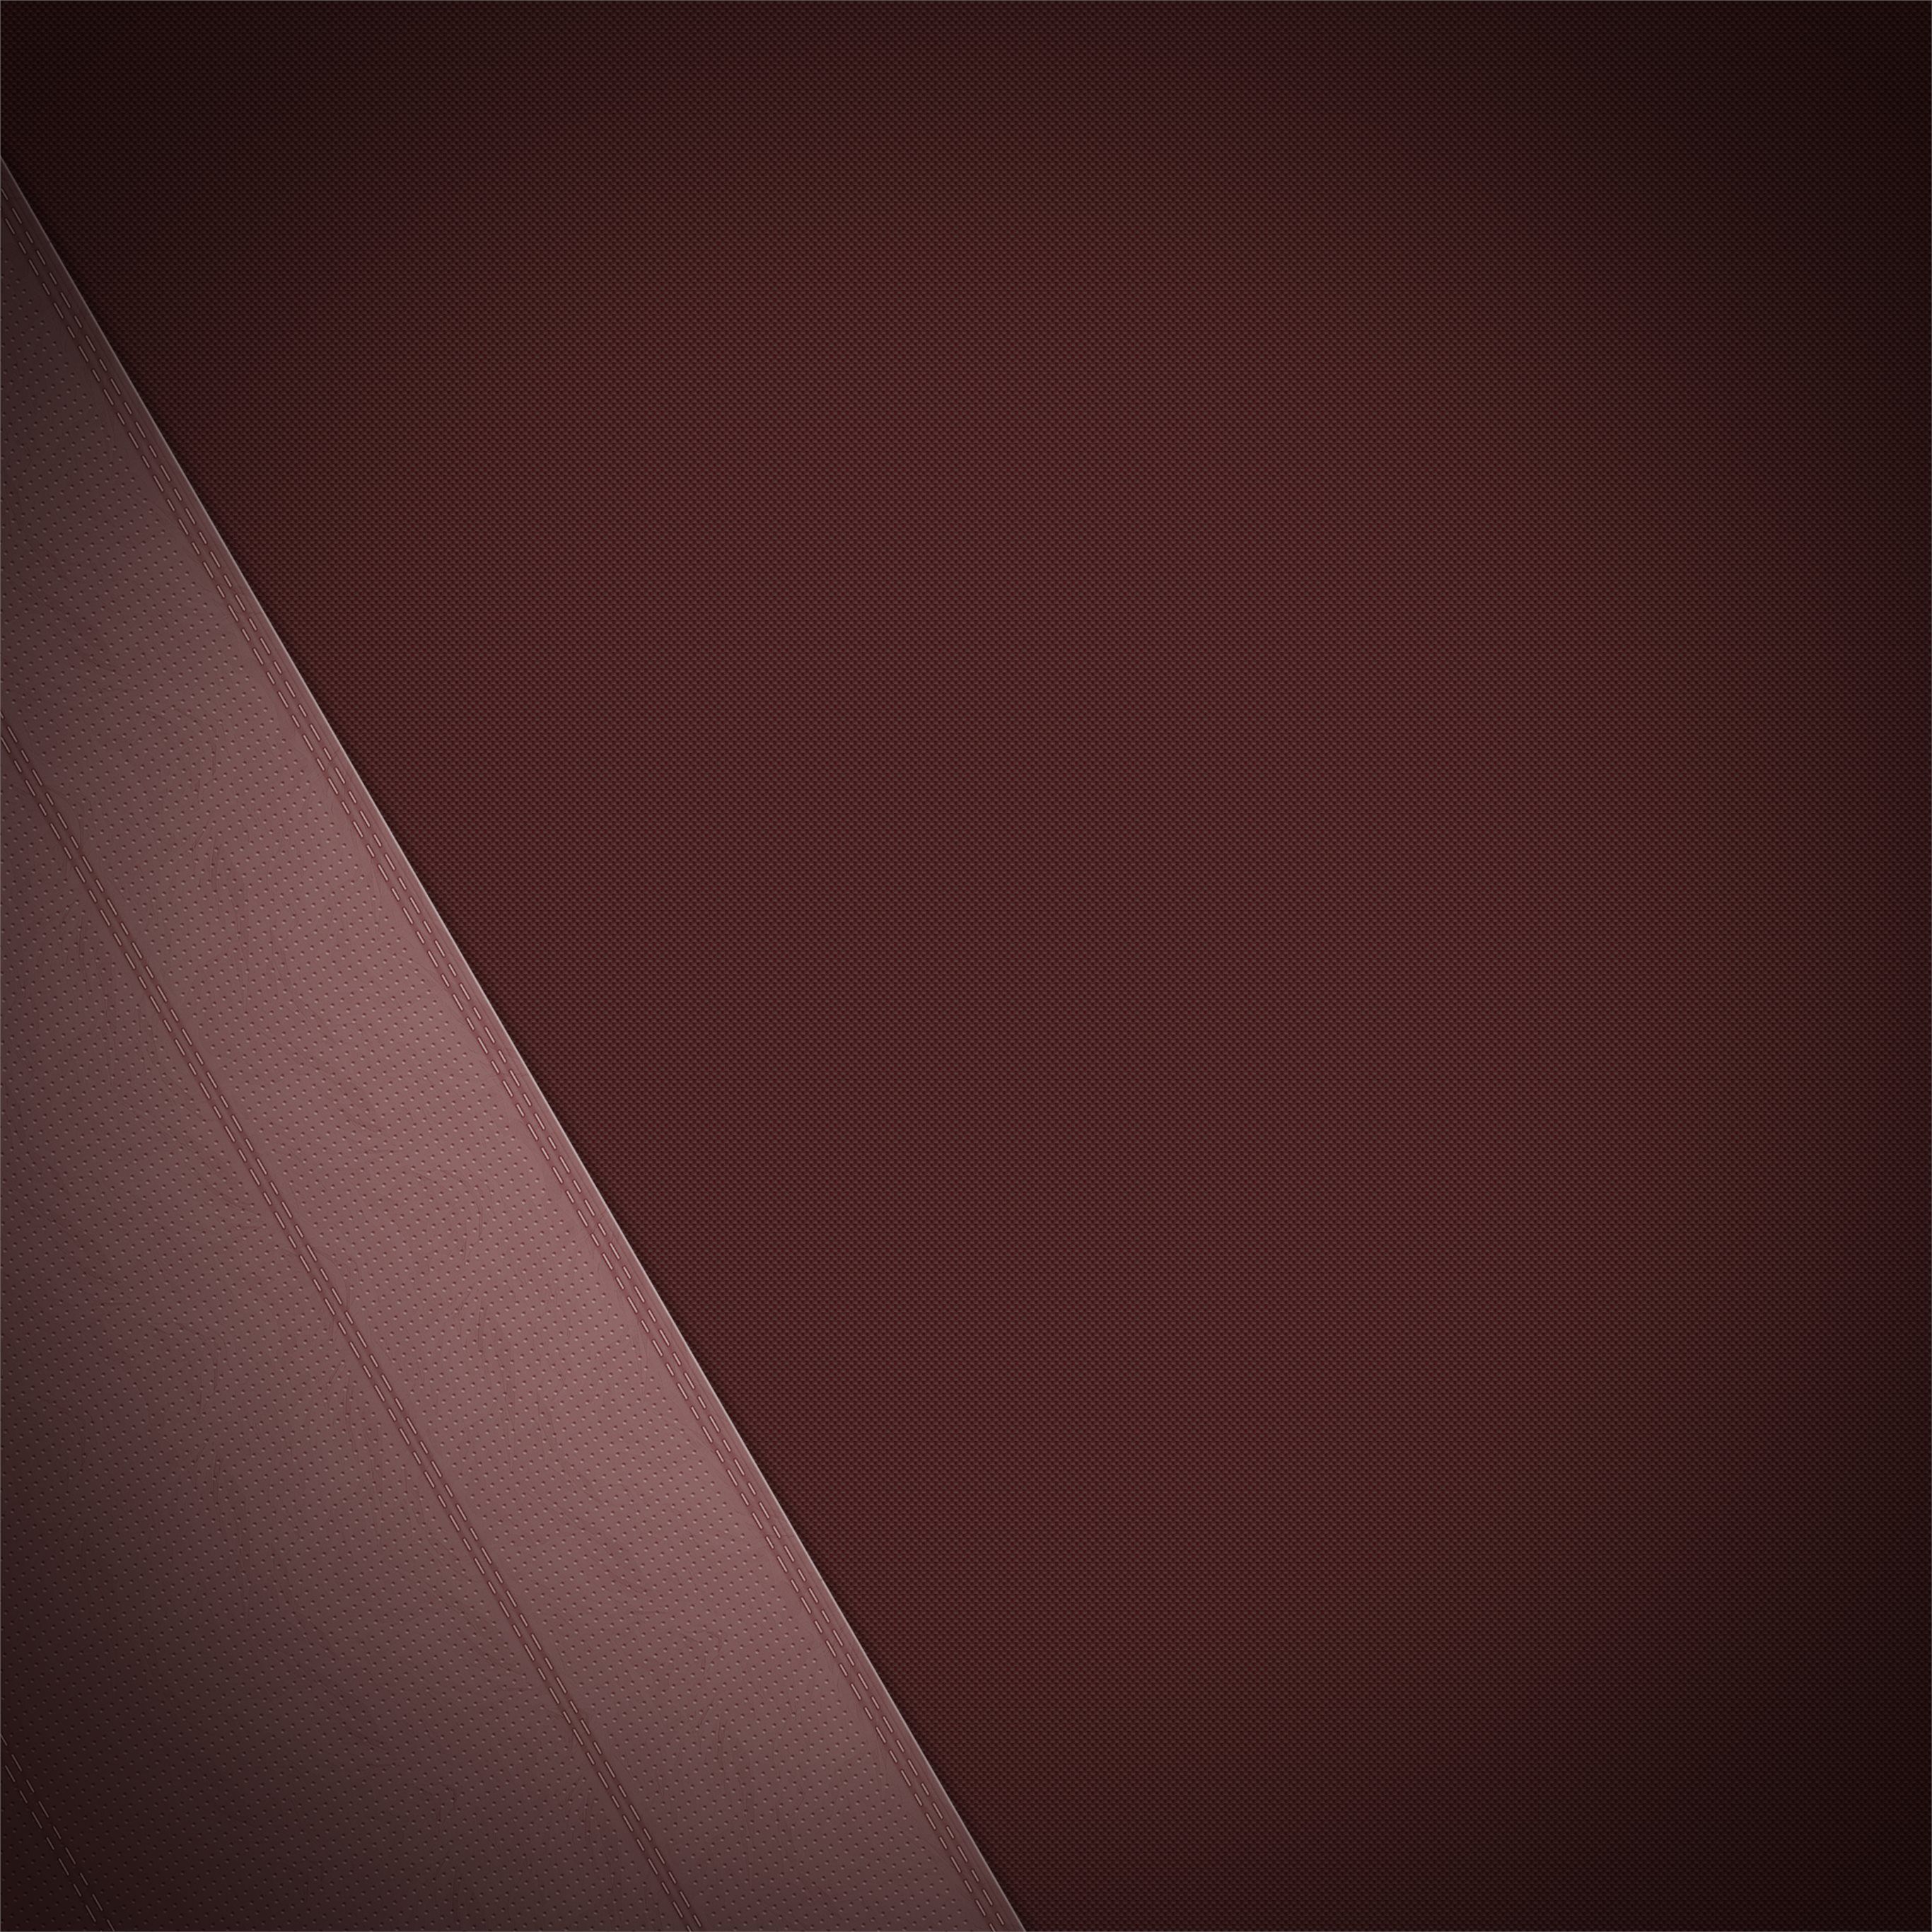 leather texture brown 4k iPad Wallpaper Free Download